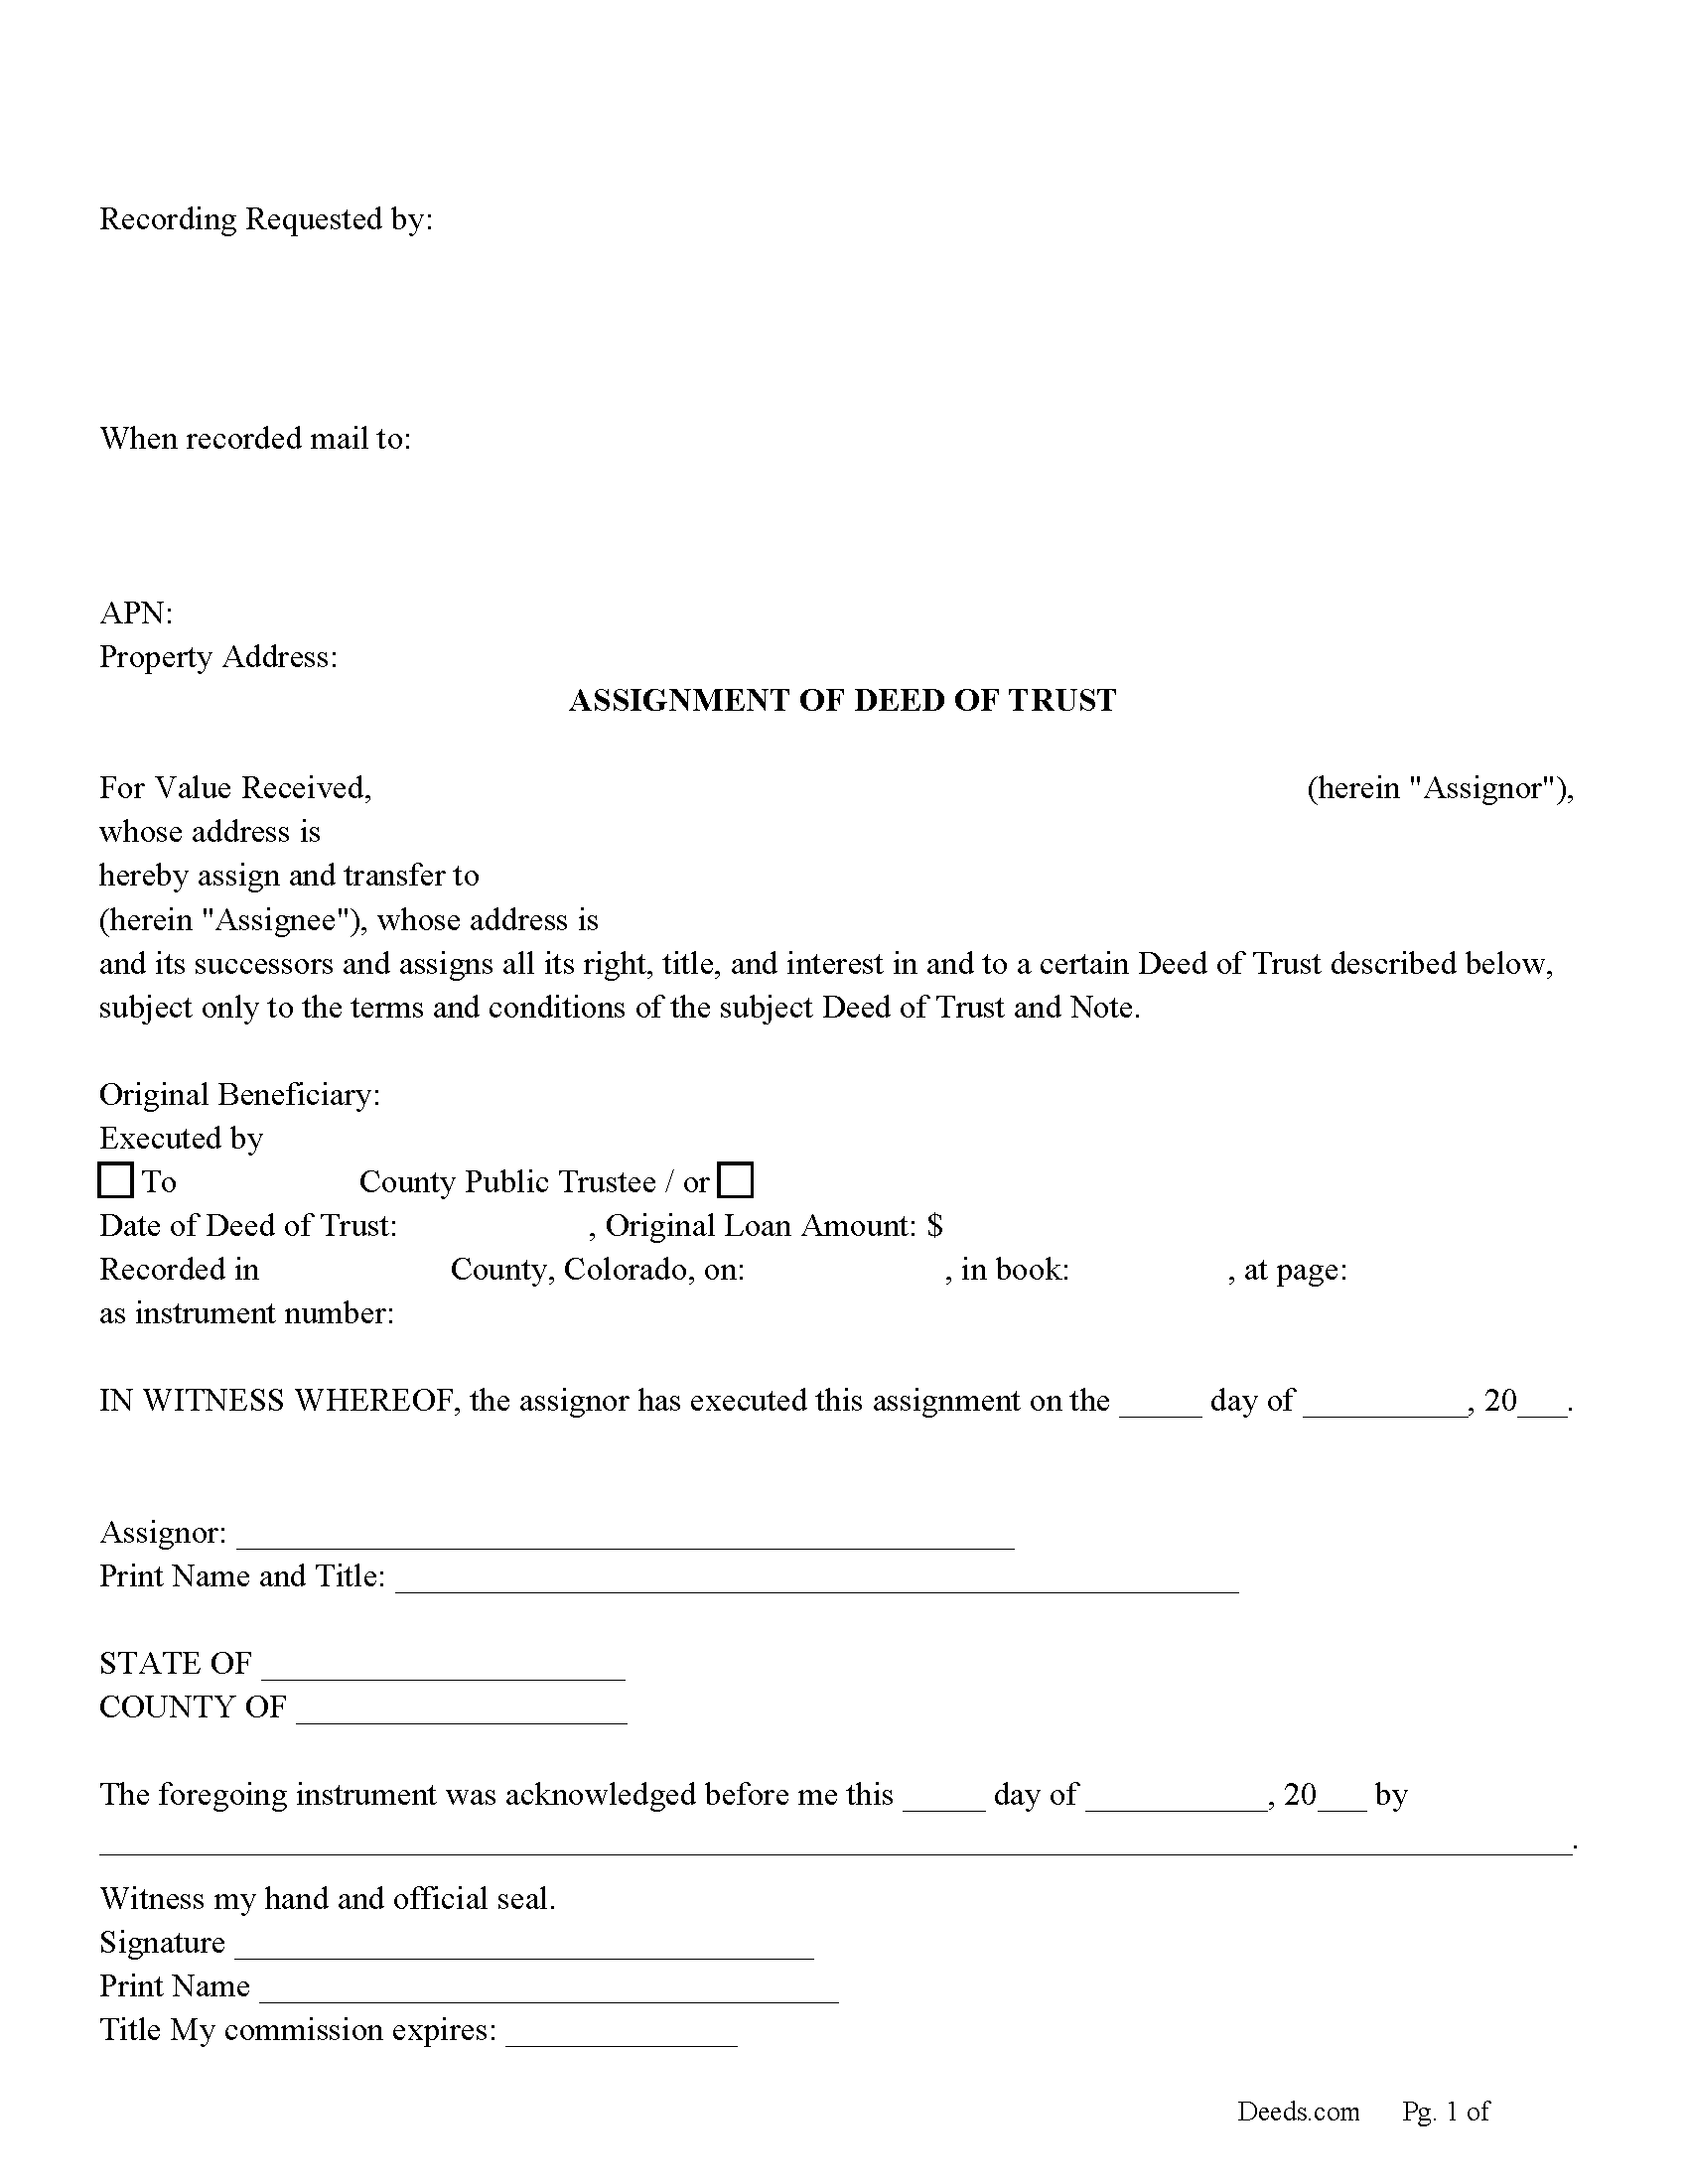 Colorado Assignment of Deed of Trust Image